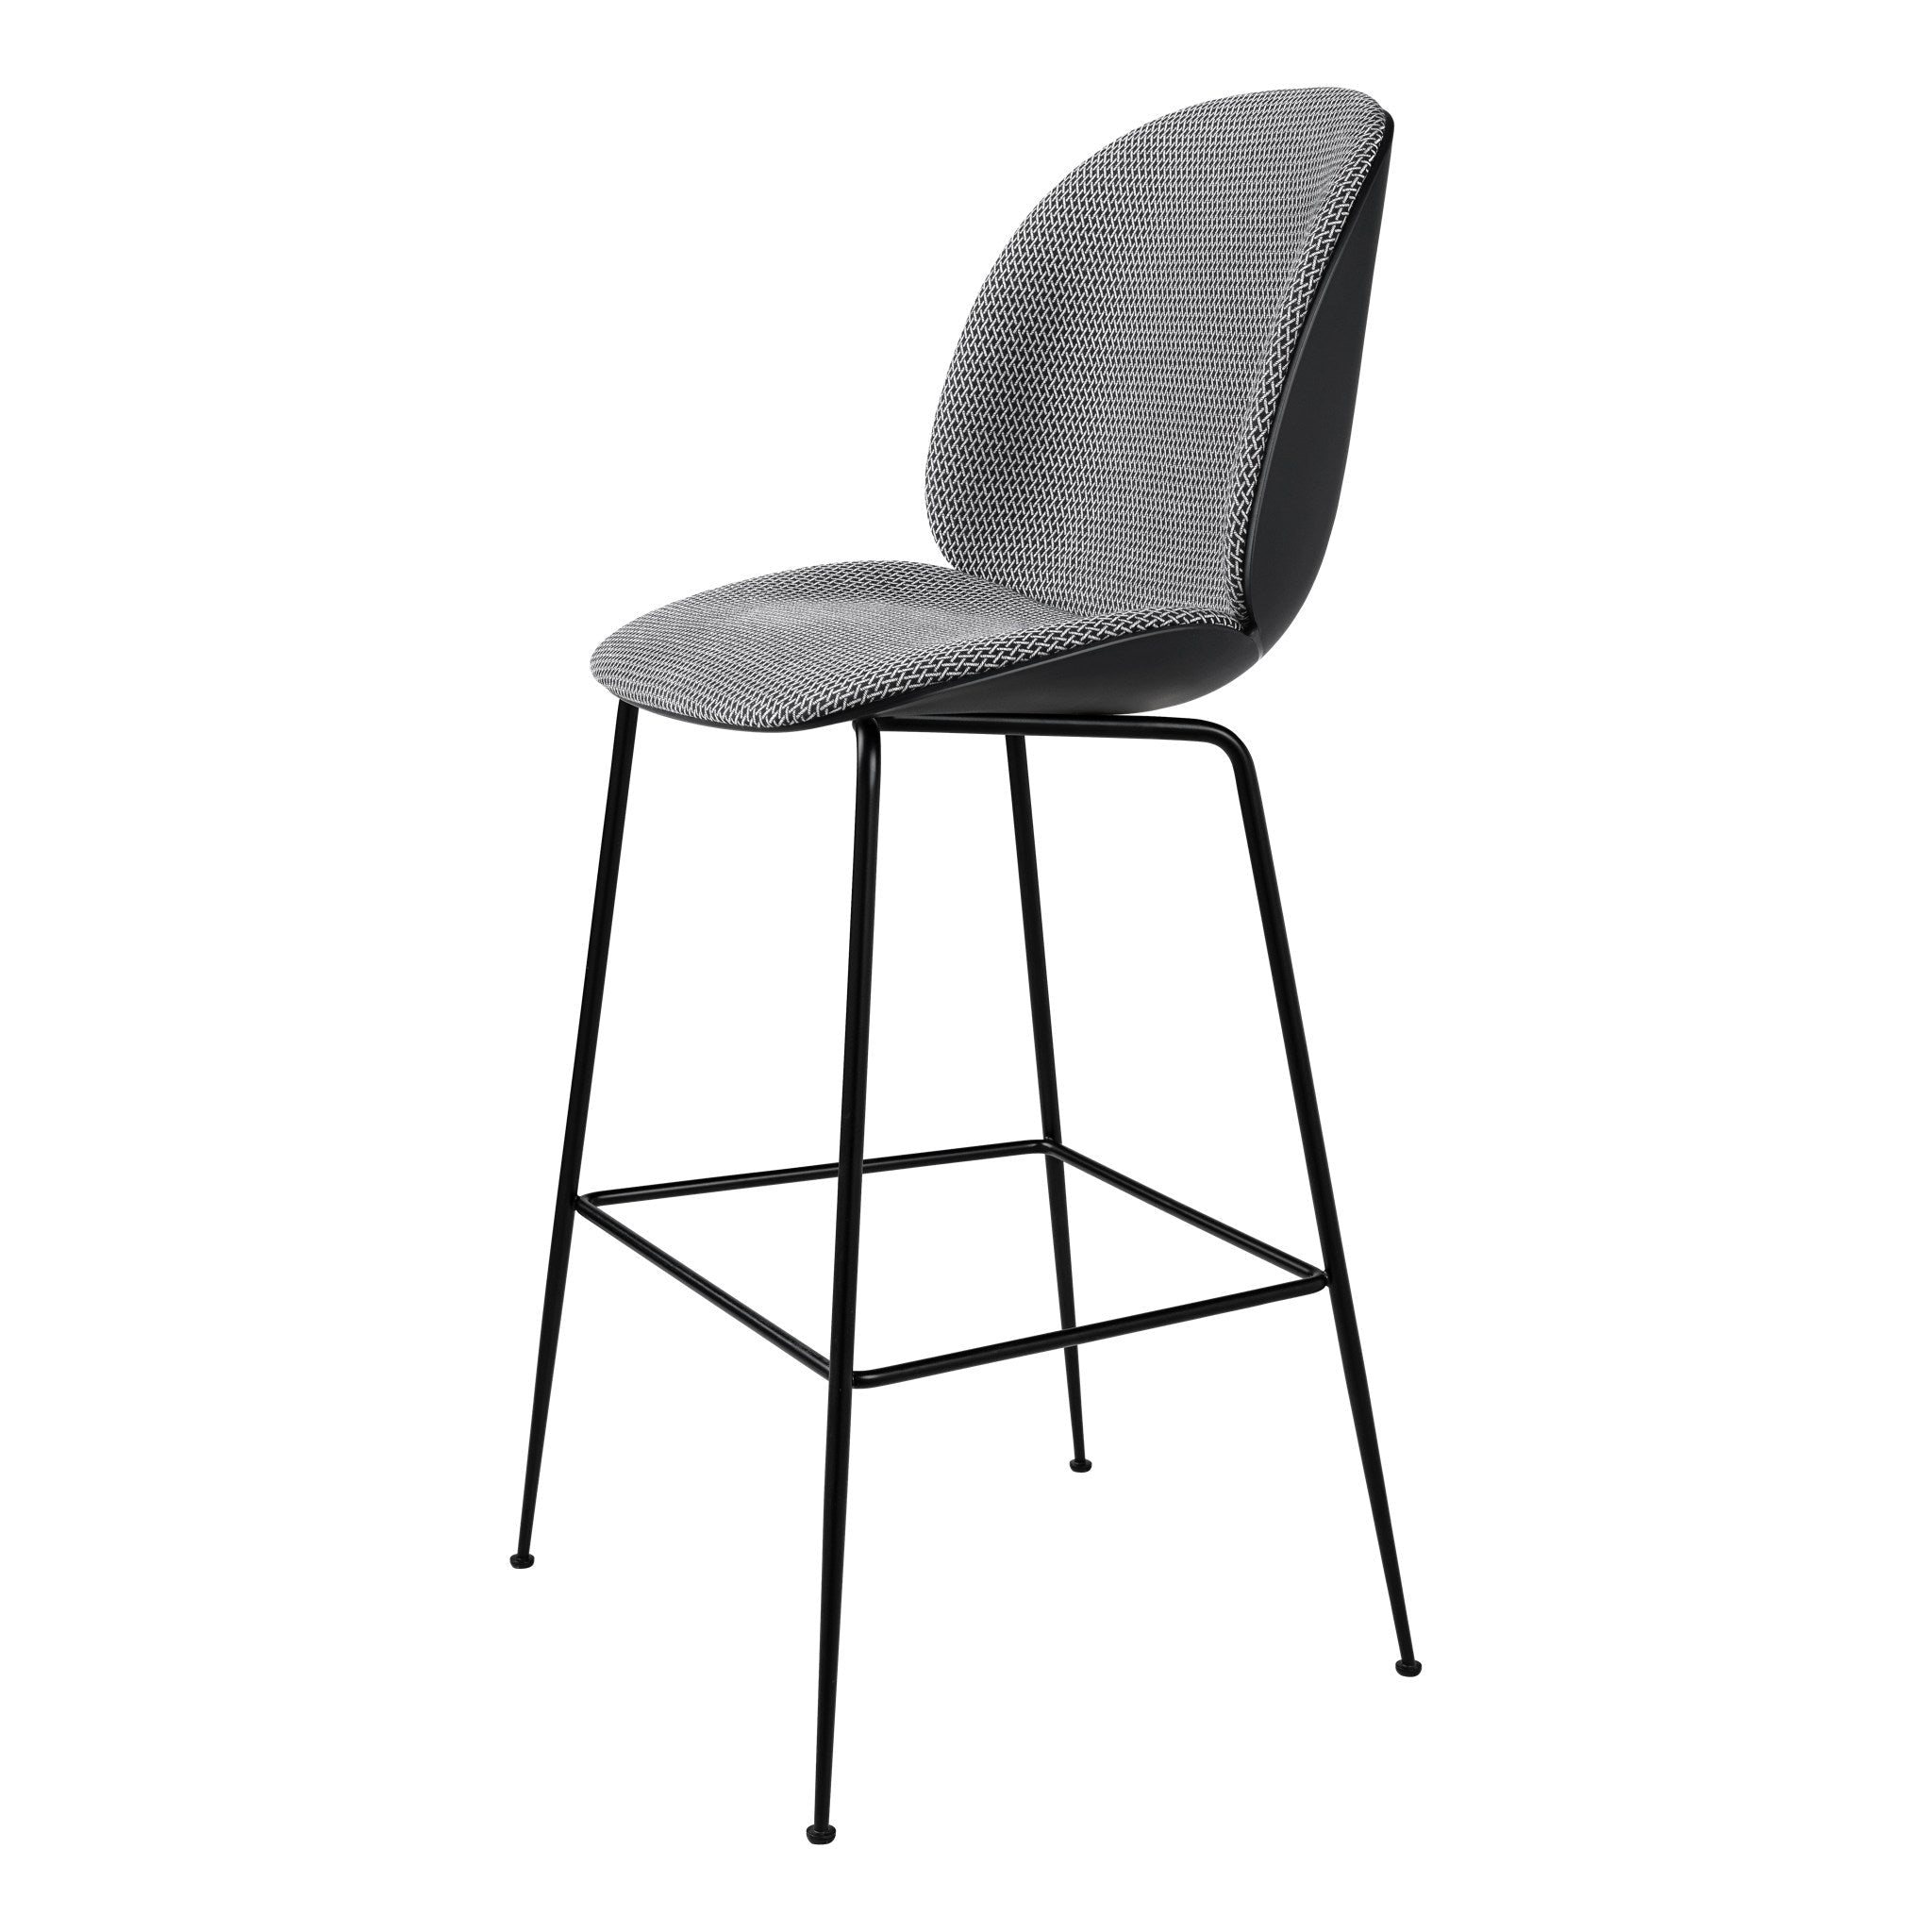 Beetle Bar Chair H75cm Front Upholstered by Gubi